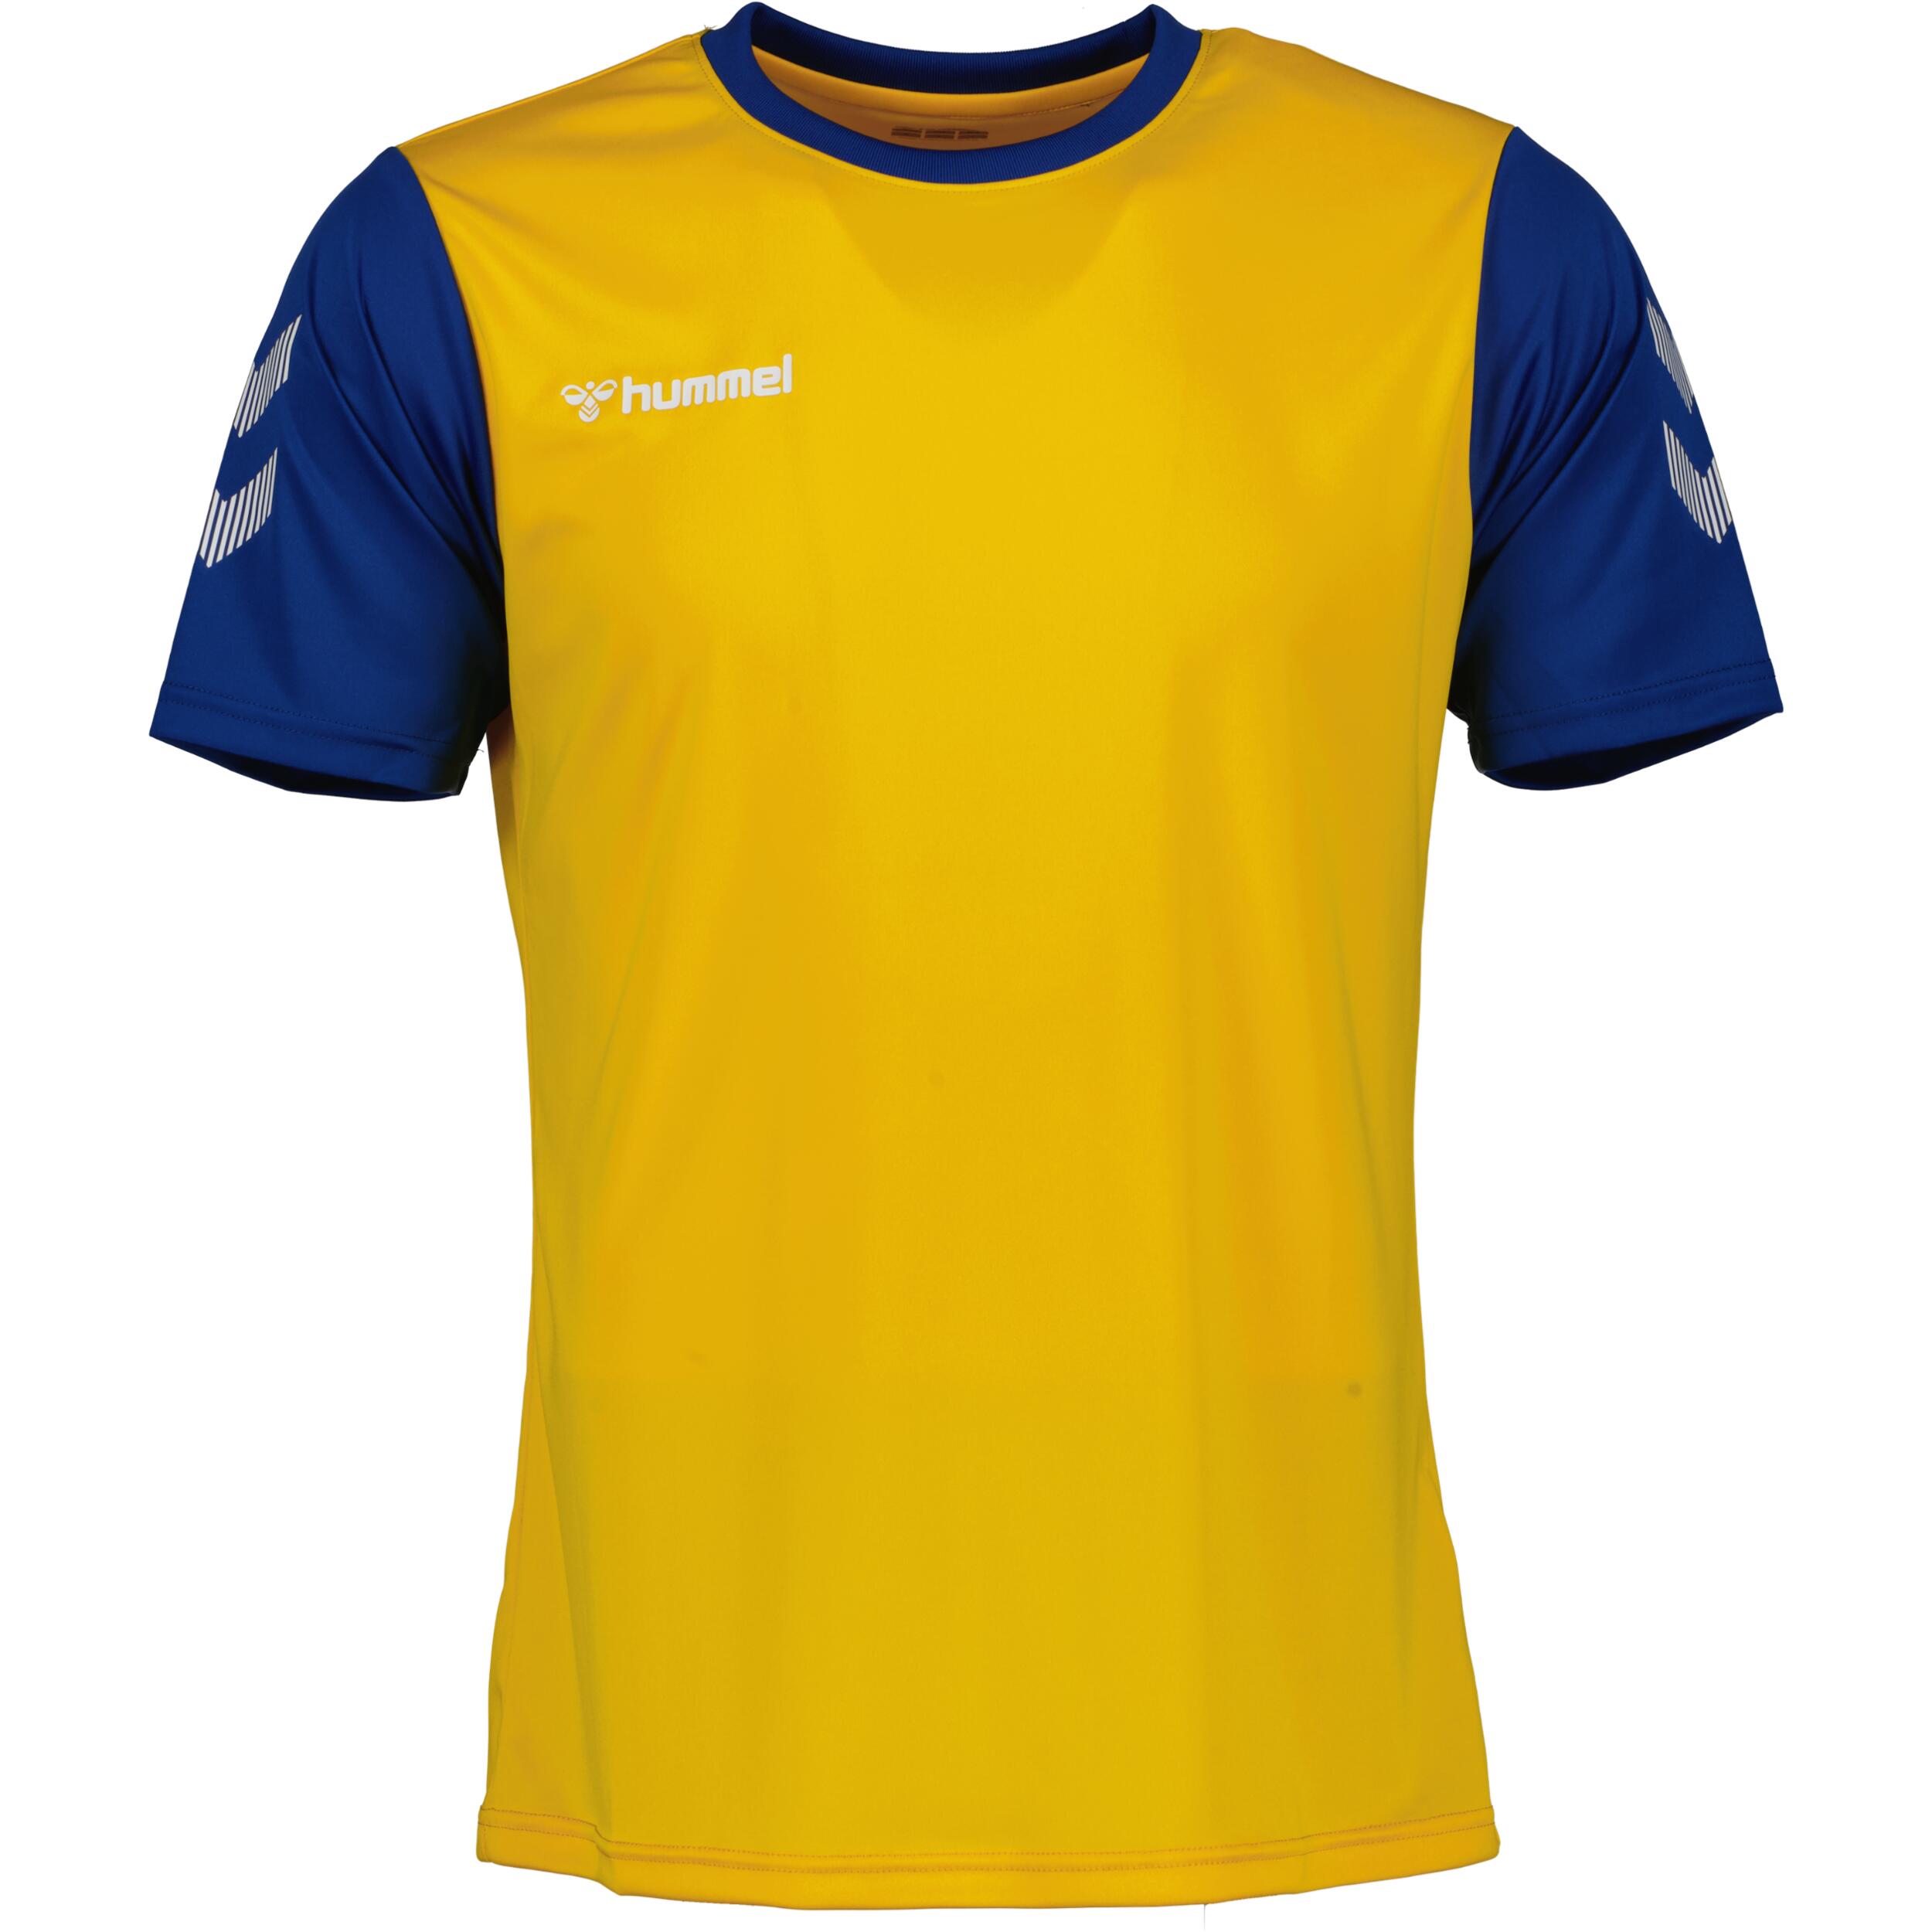 HUMMEL Match jersey for men, great for football, in yellow/blue